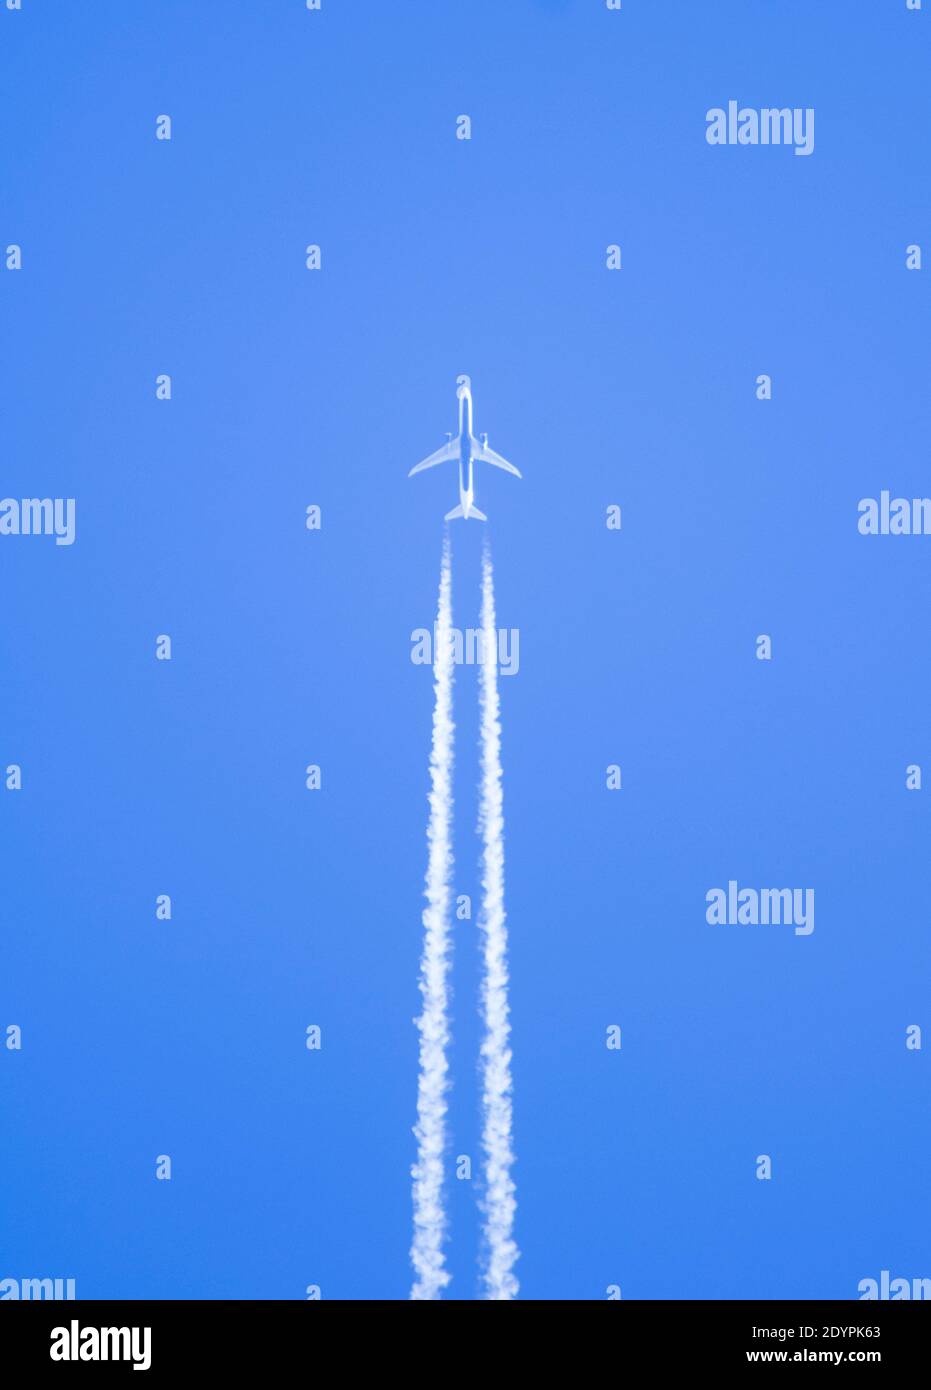 A airplane seen from below with the steam trails very marked. copy space Stock Photo